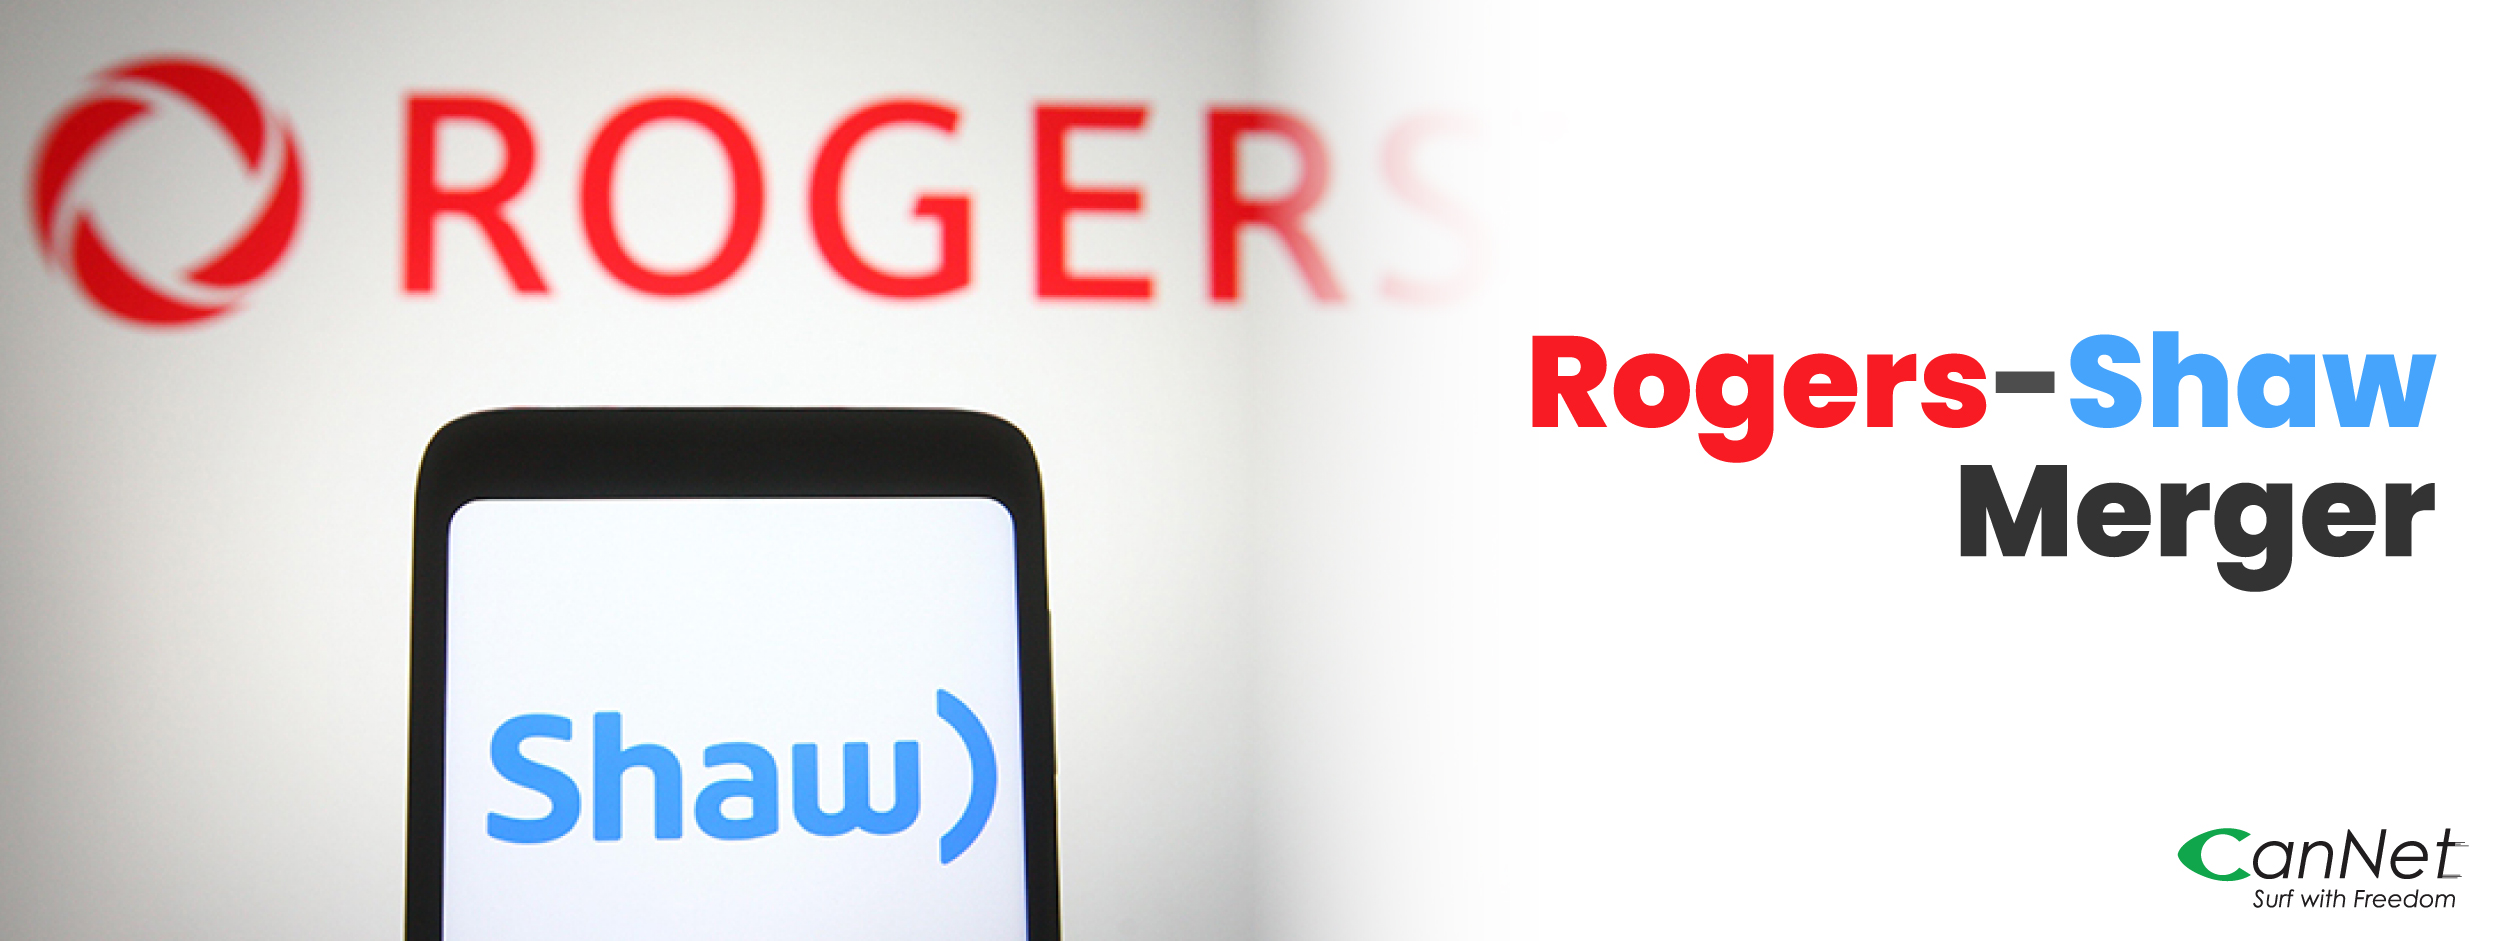 Rogers-Shaw Merger